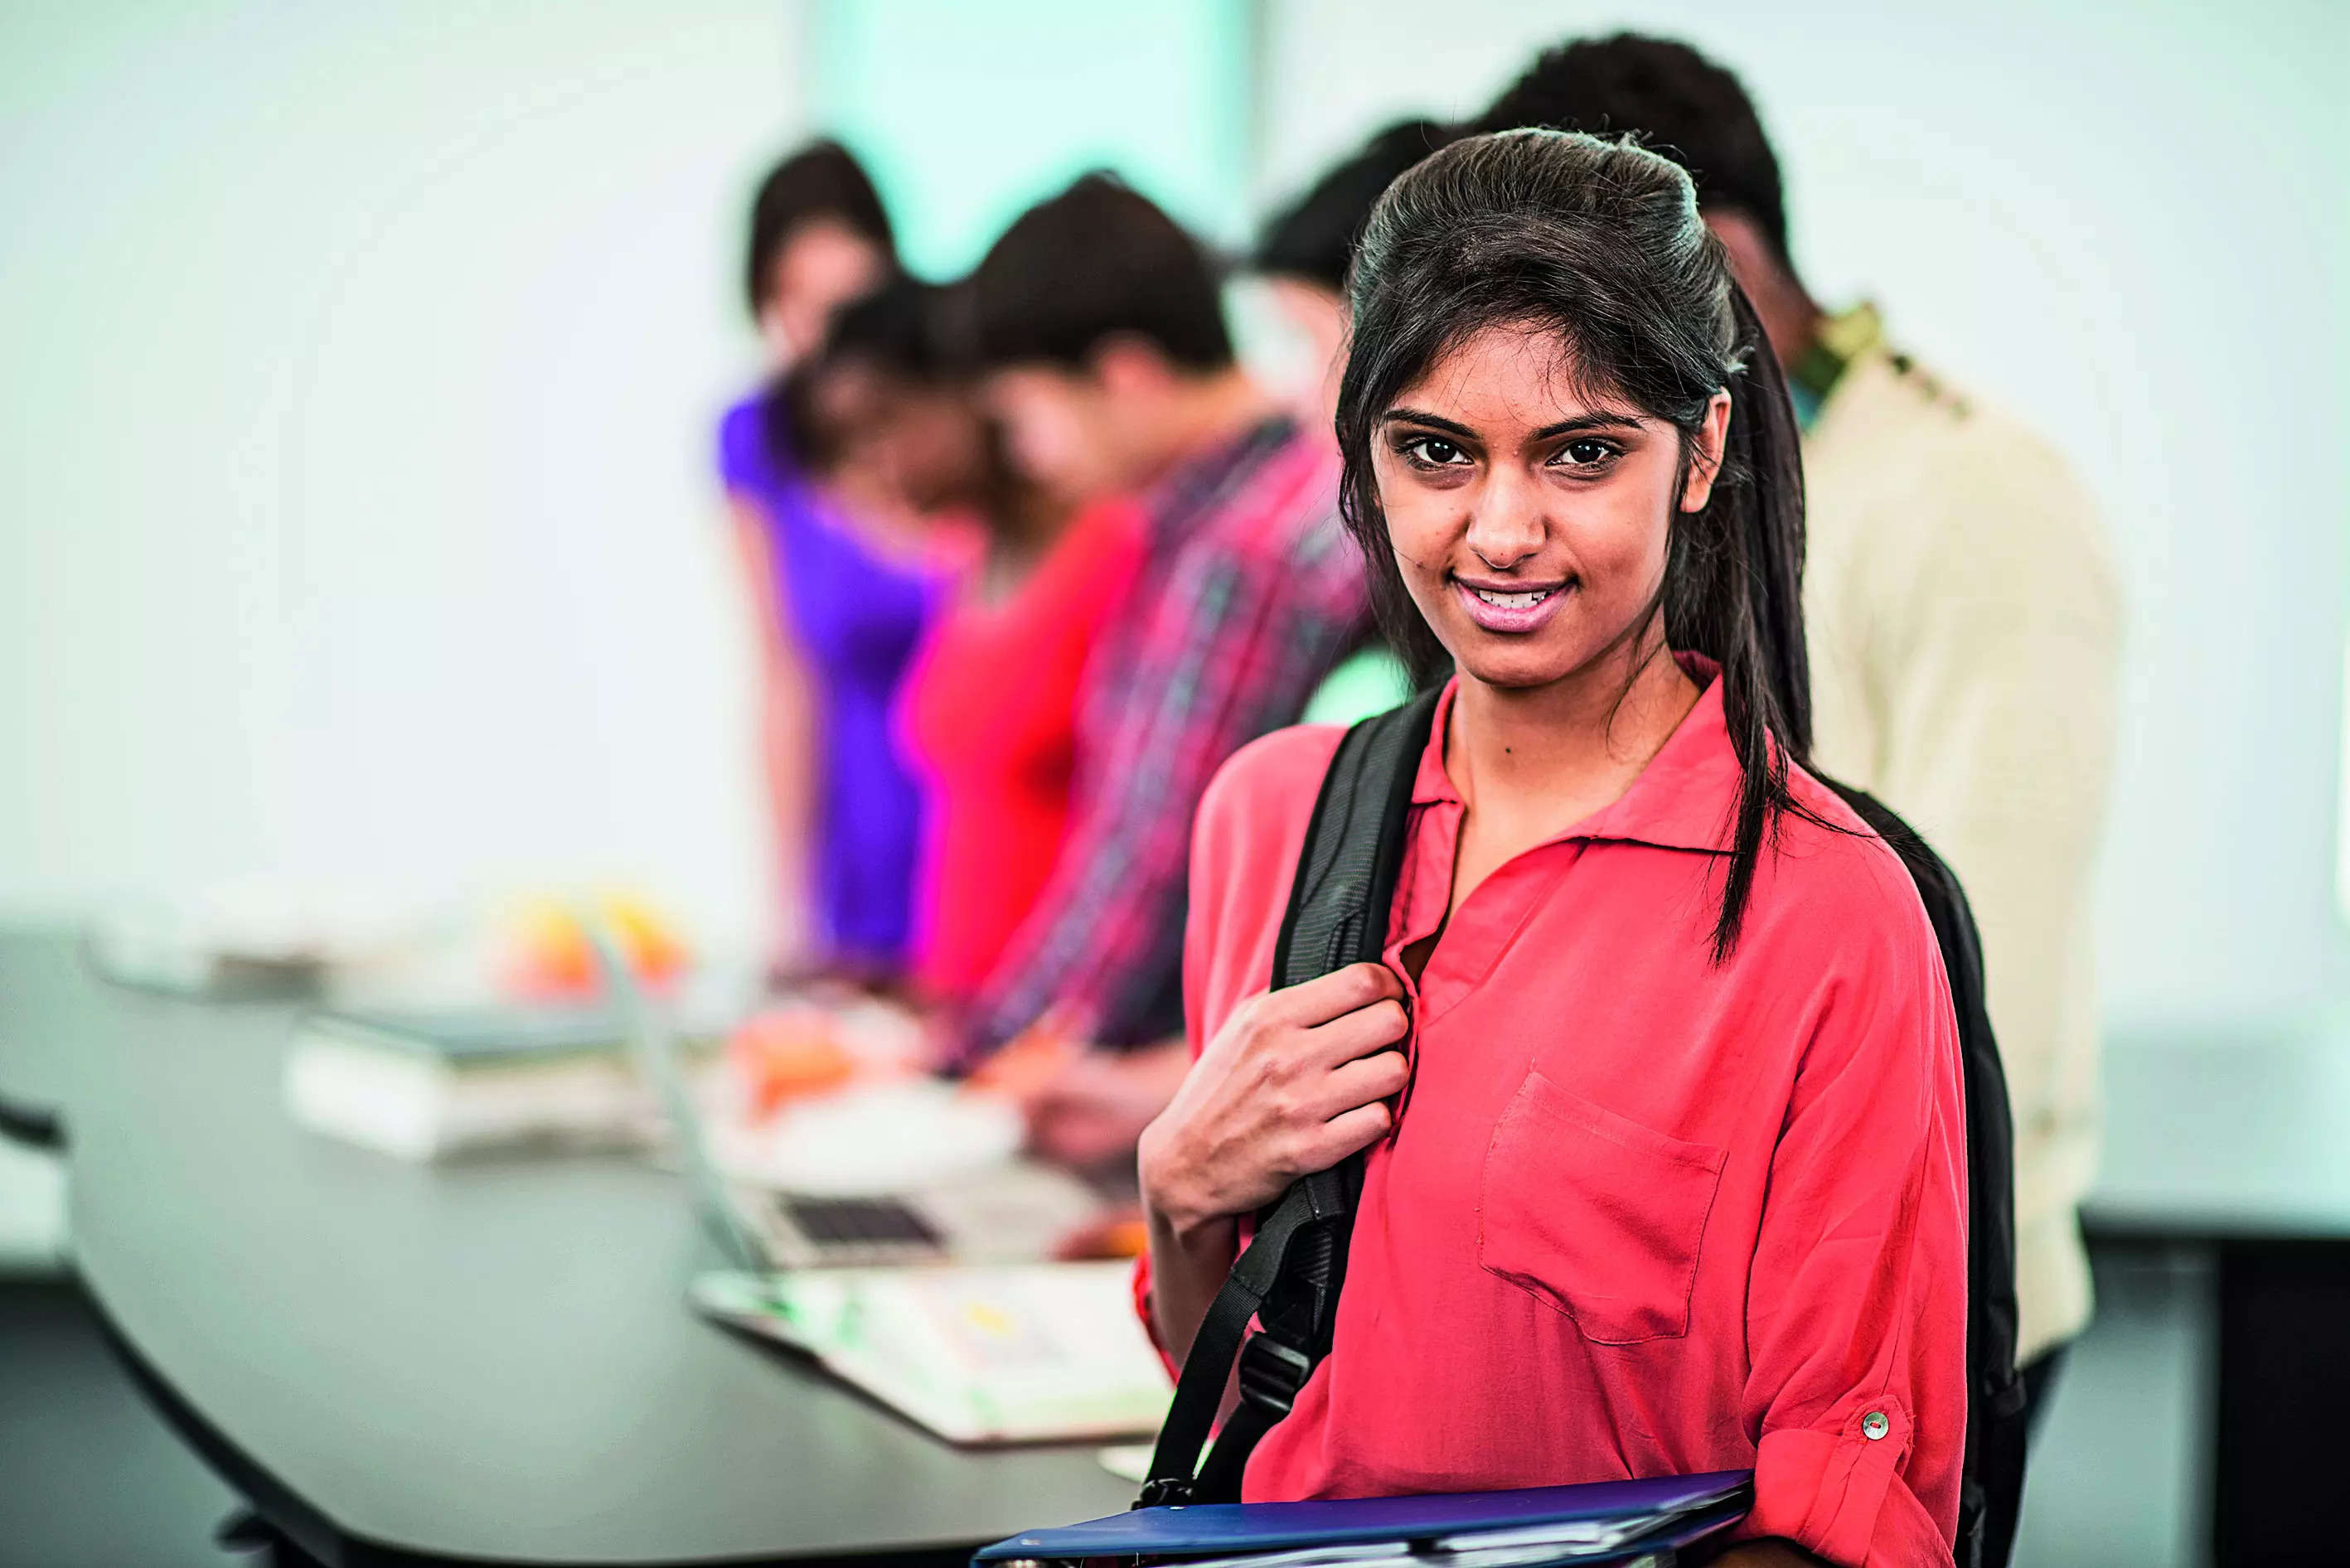 40 per cent of campus hires last year were women 